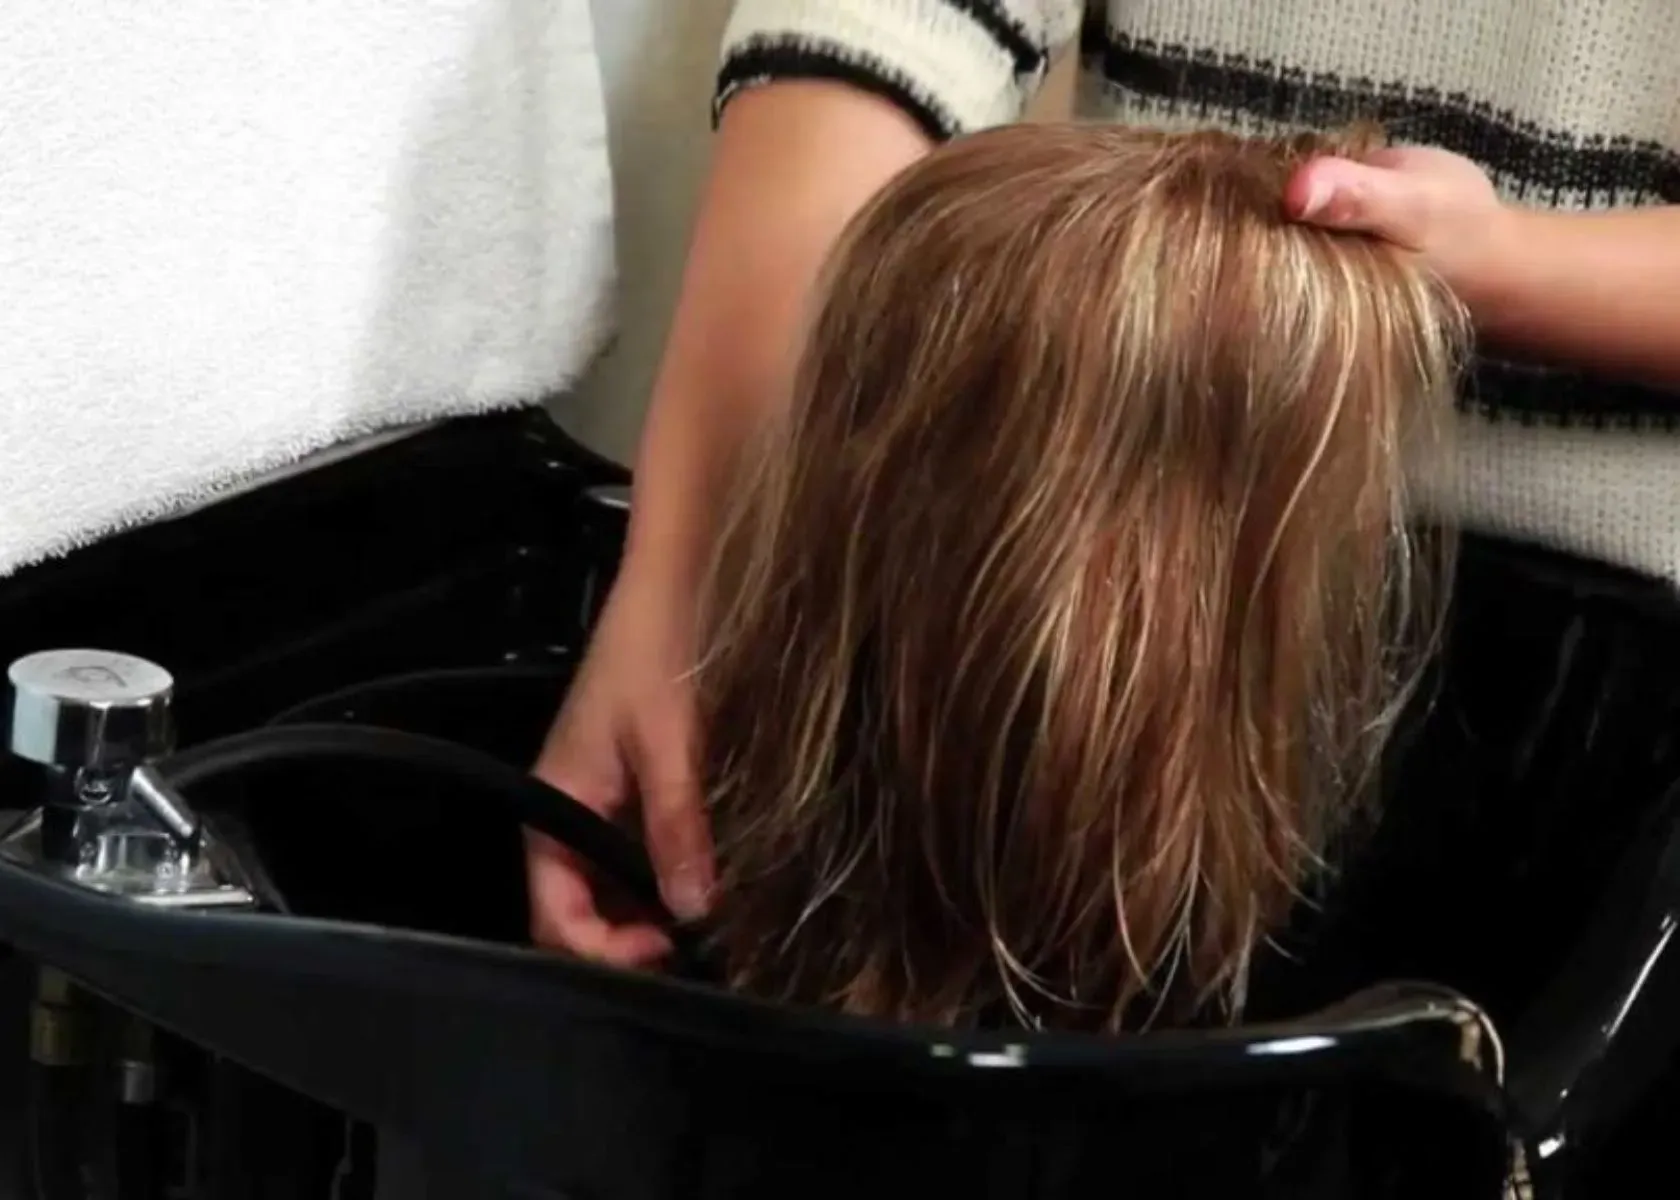 The Best Method for Washing a Human Hair Wig